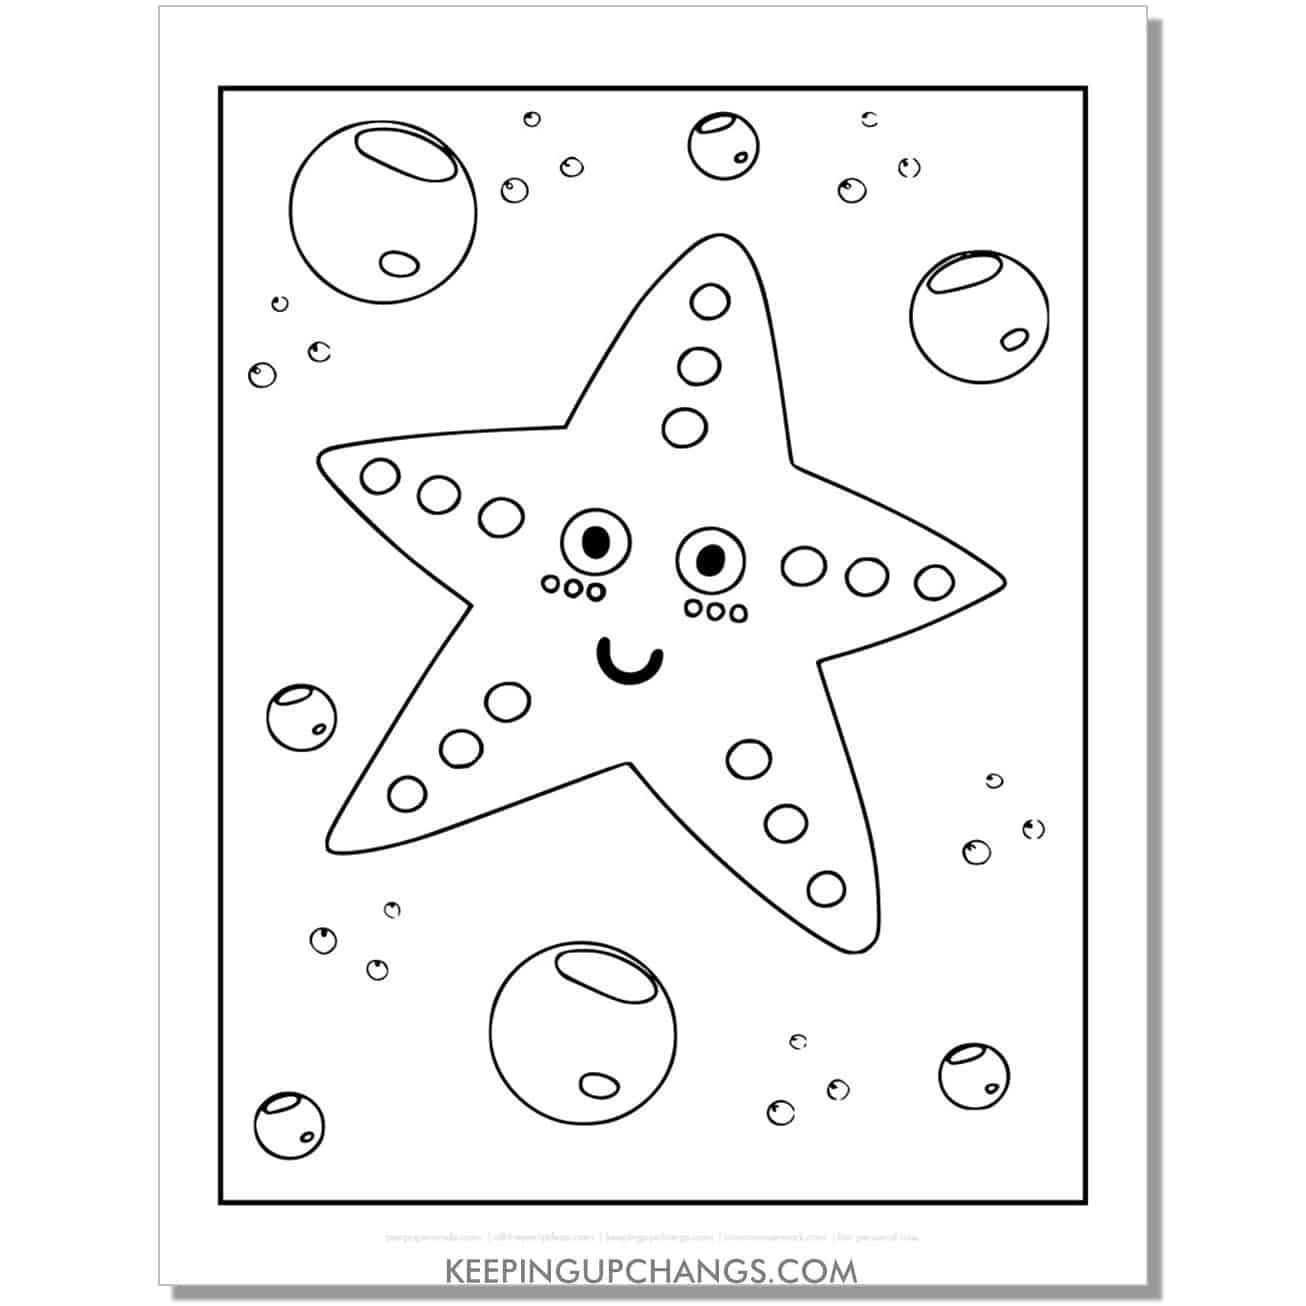 free cartoon full size sea star, starfish coloring page, sheet for kids.